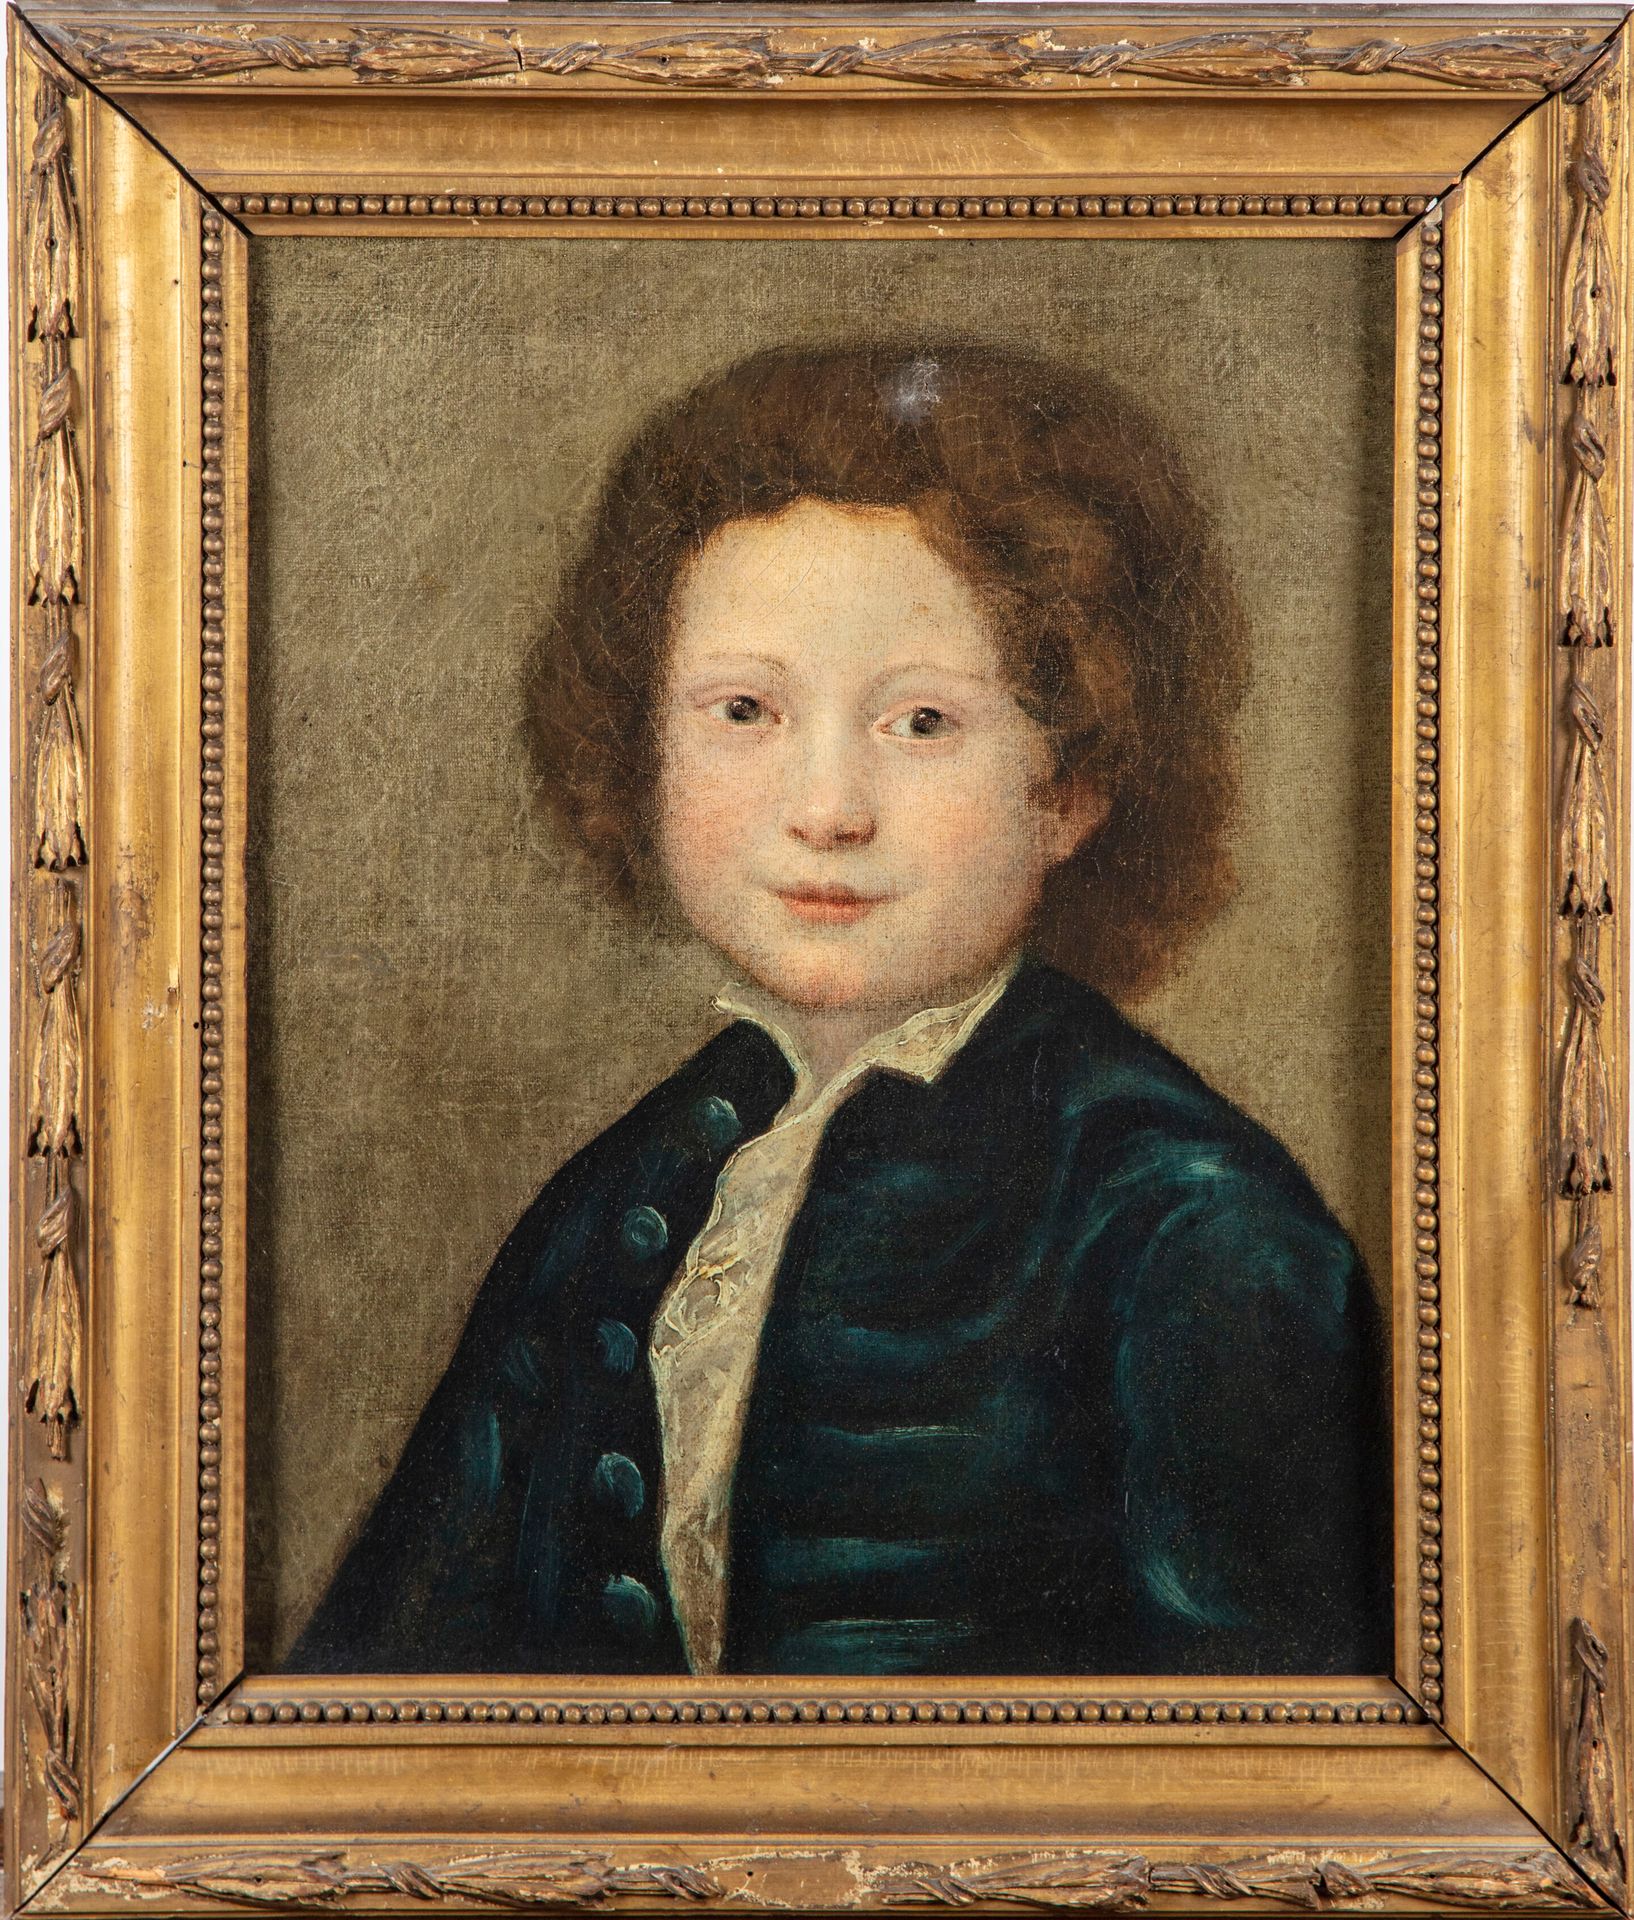 Null ITALIAN SCHOOL 19th century

Portrait of a young boy in the style of the 18&hellip;